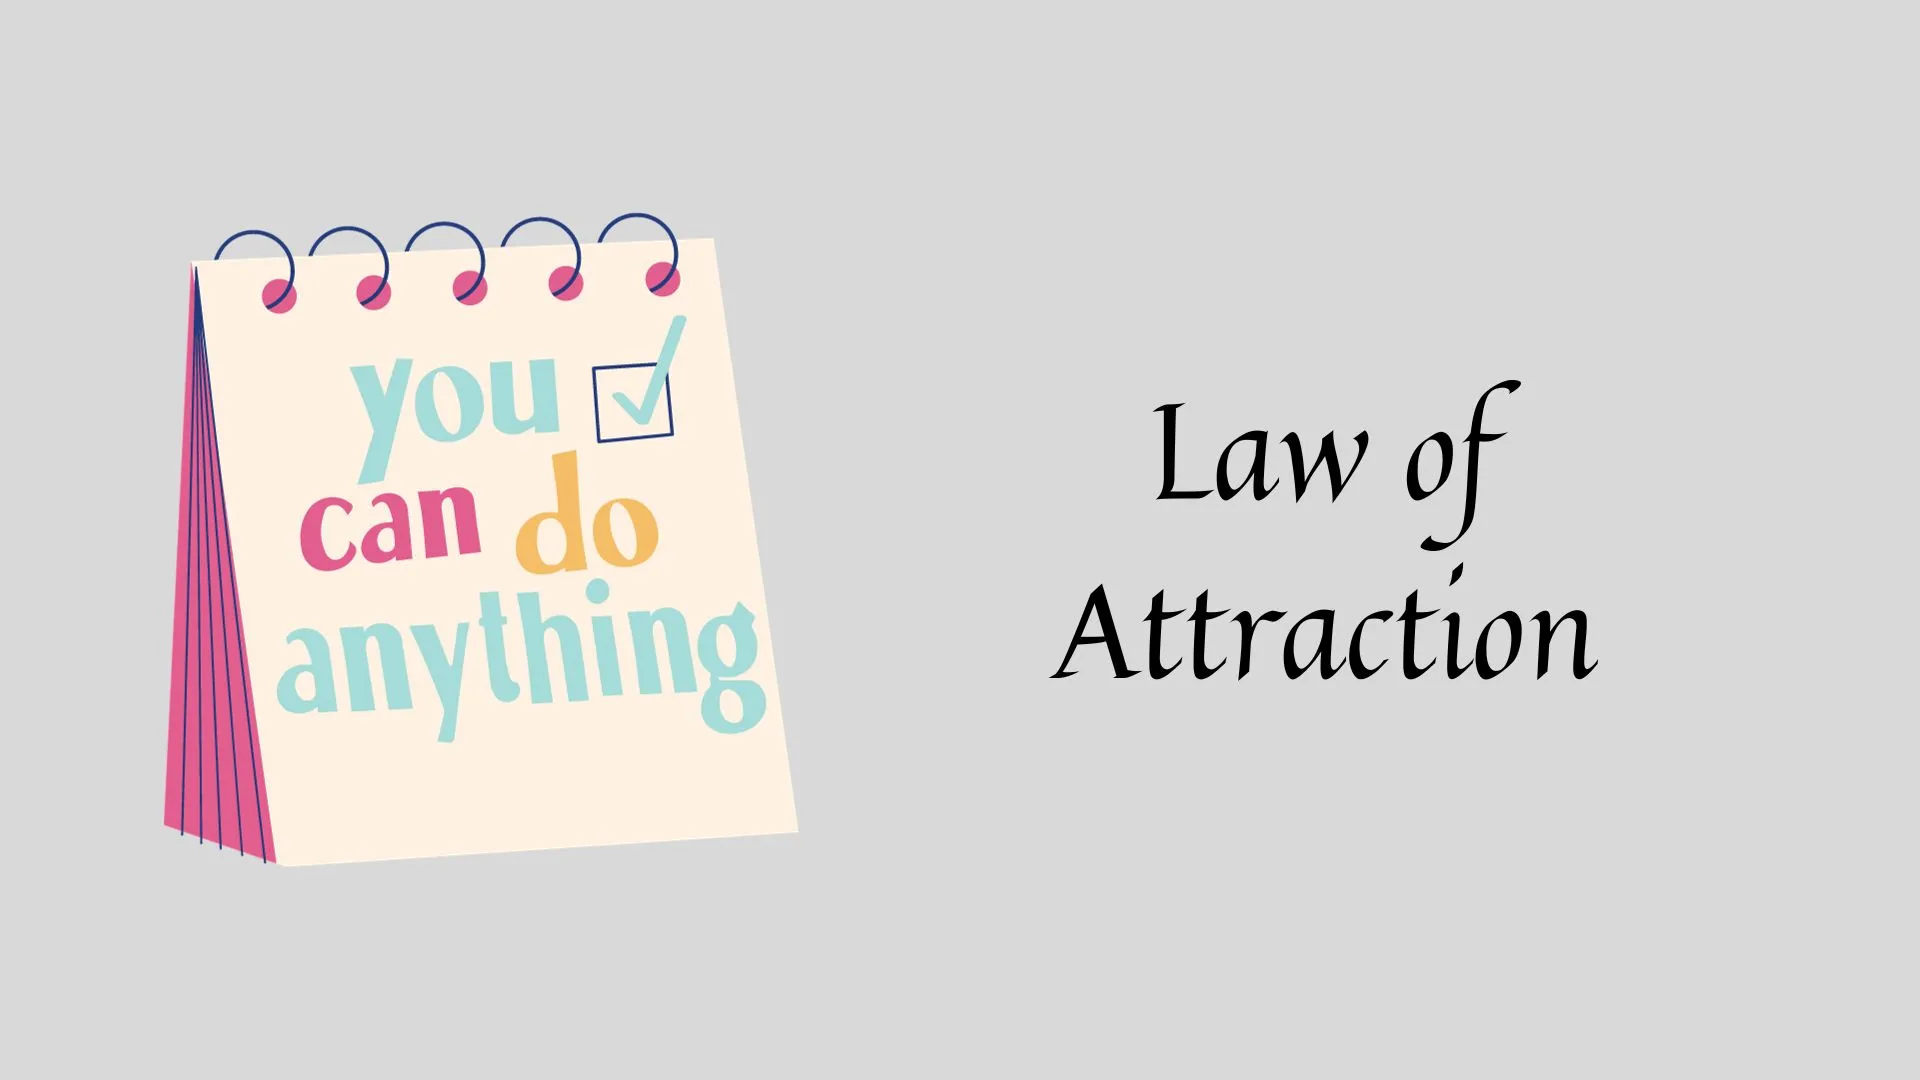 What Is the Law of Attraction